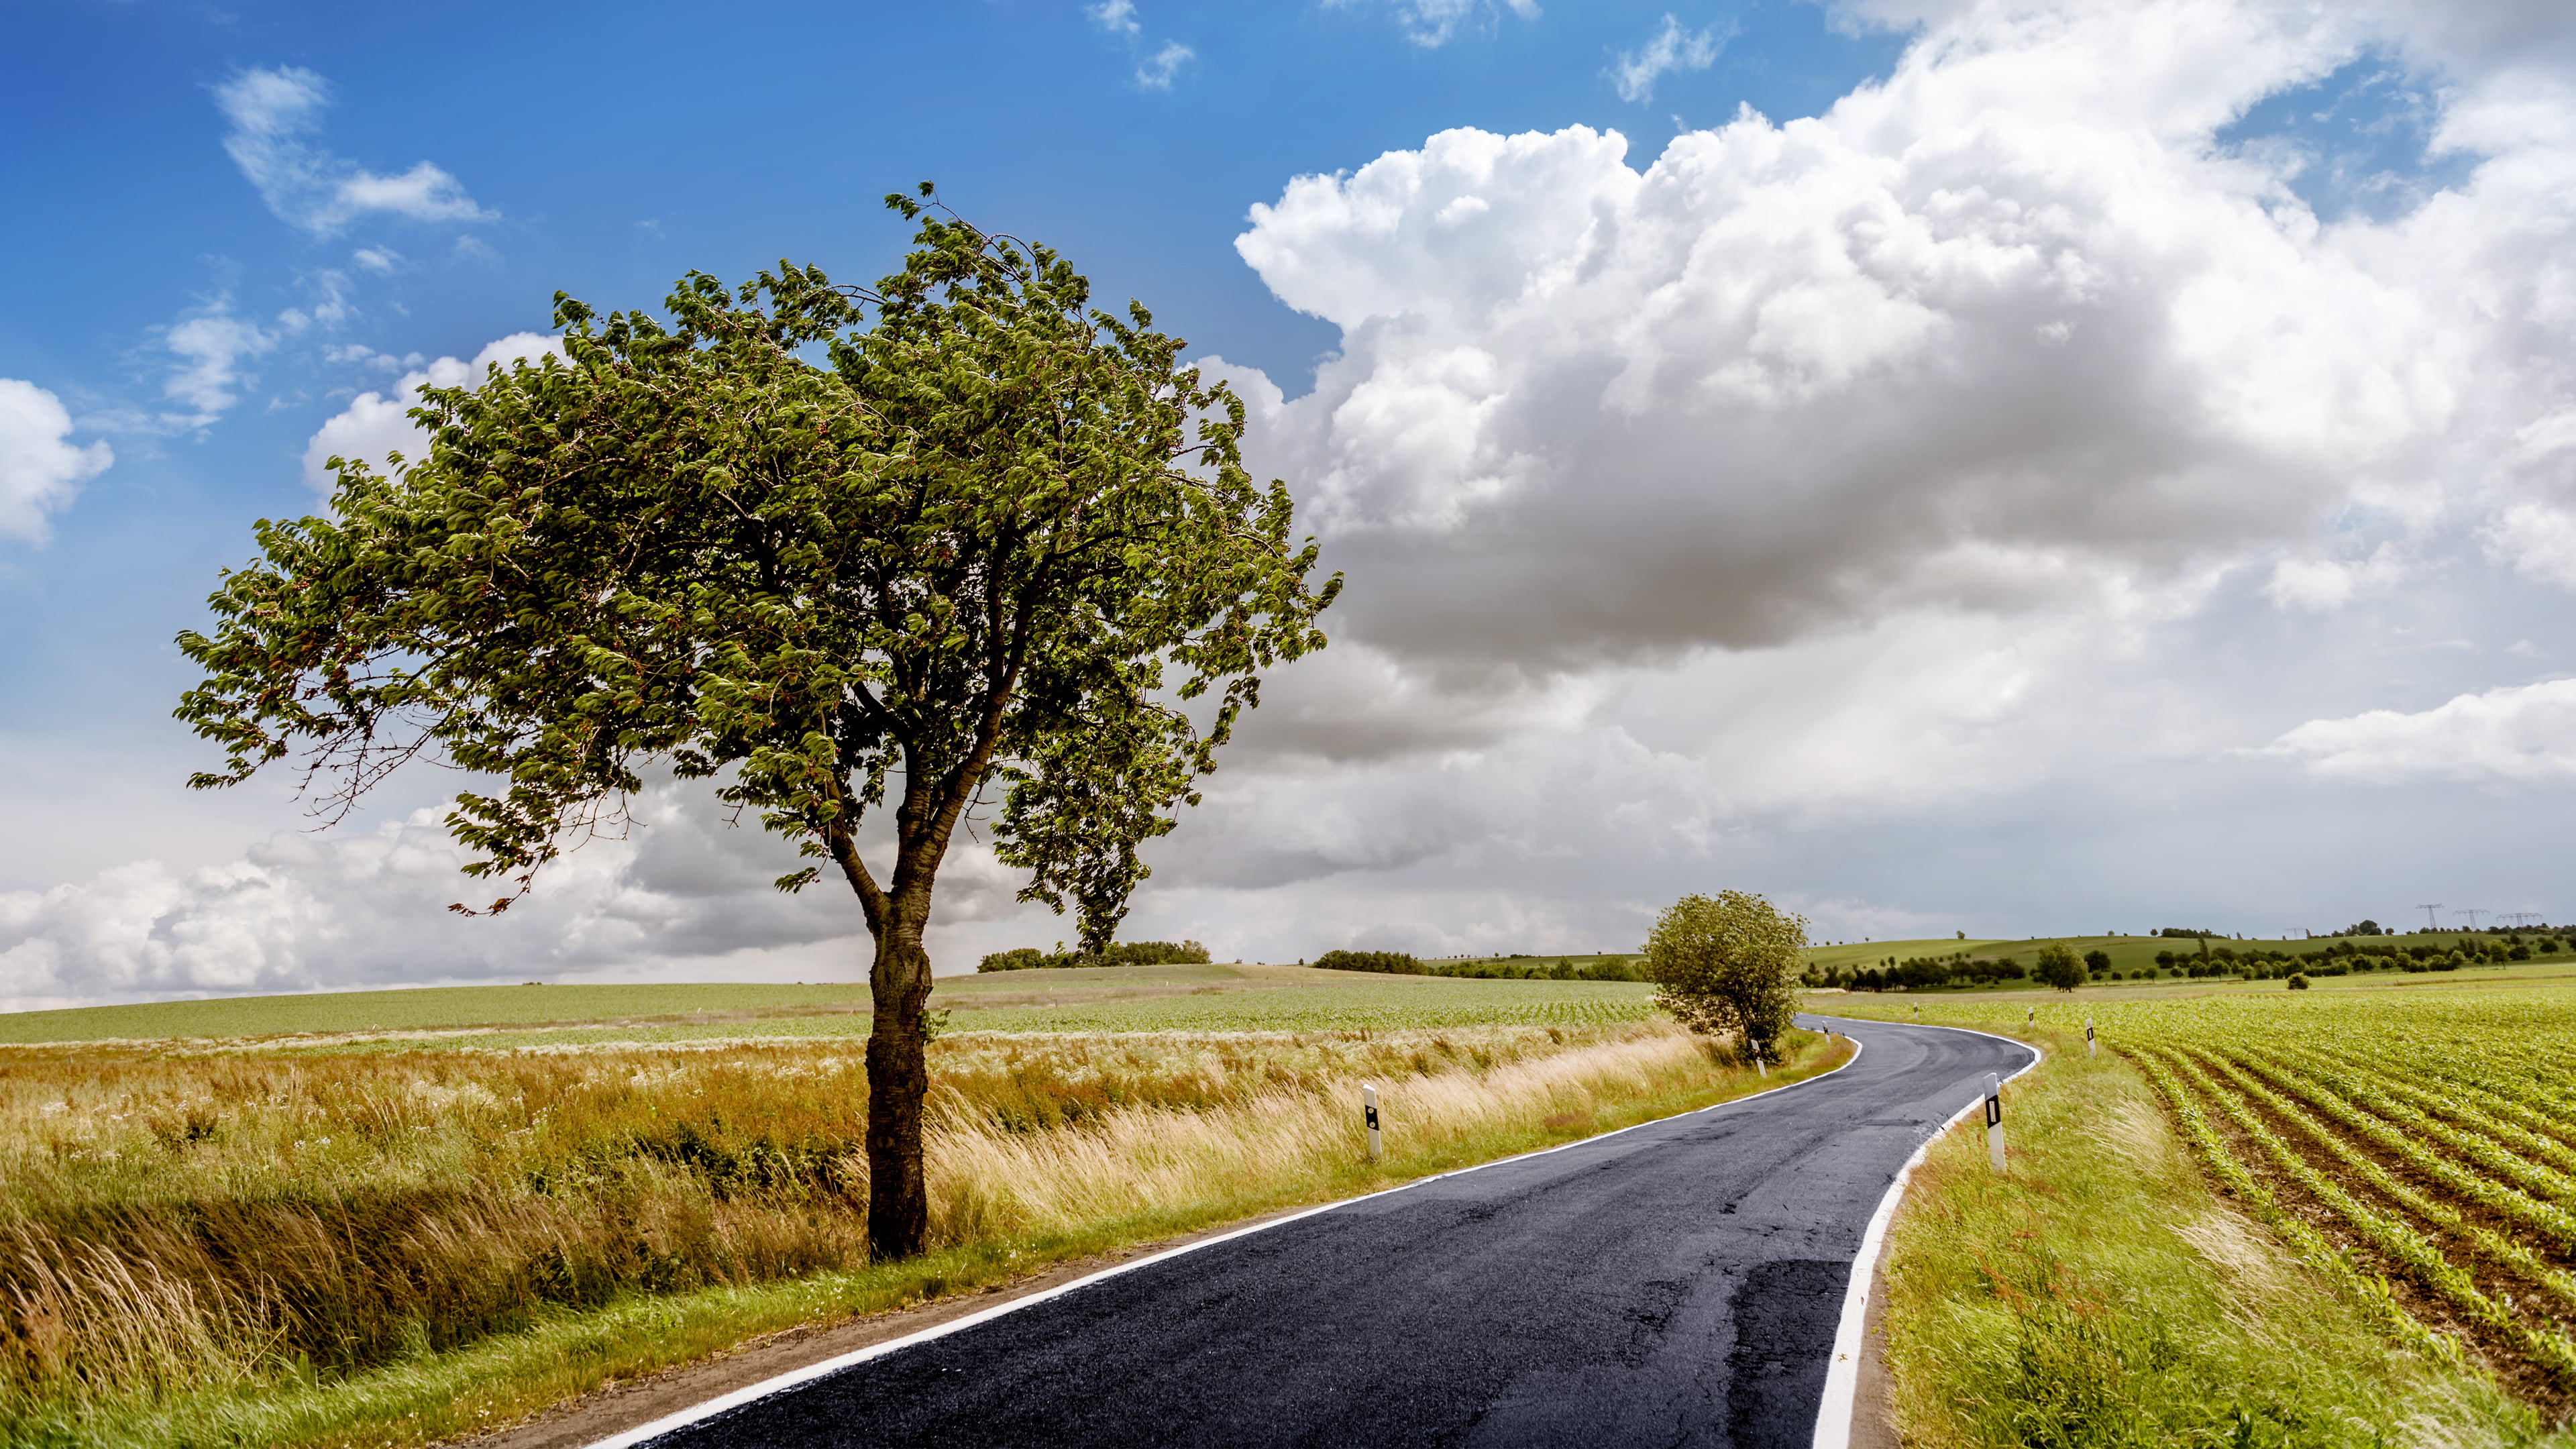 2560x1080 Resolution Paved Road Between Green Grass Field Trees